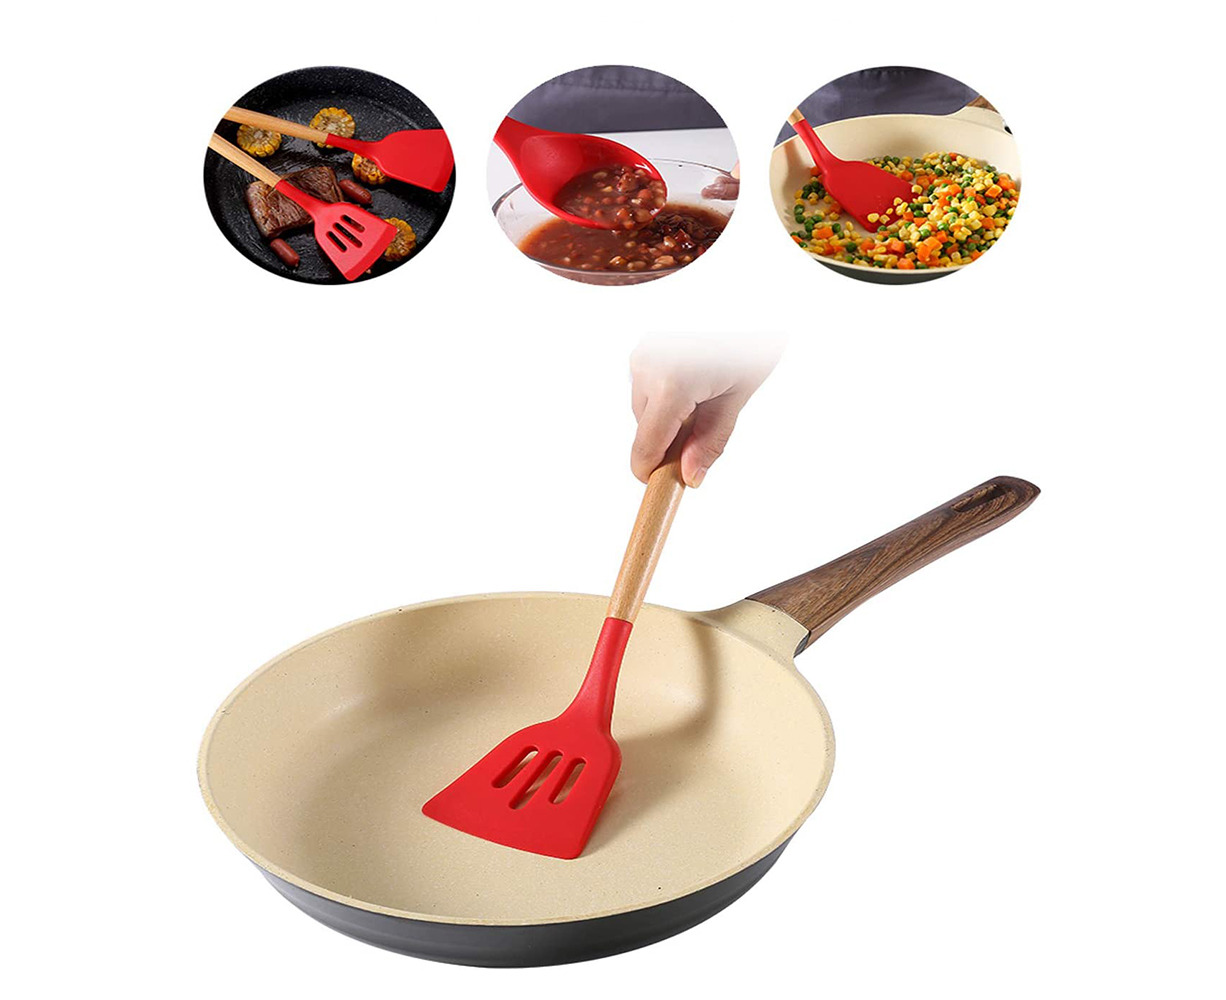 Silicone Spatula With Red Wooden Handle - Oikos